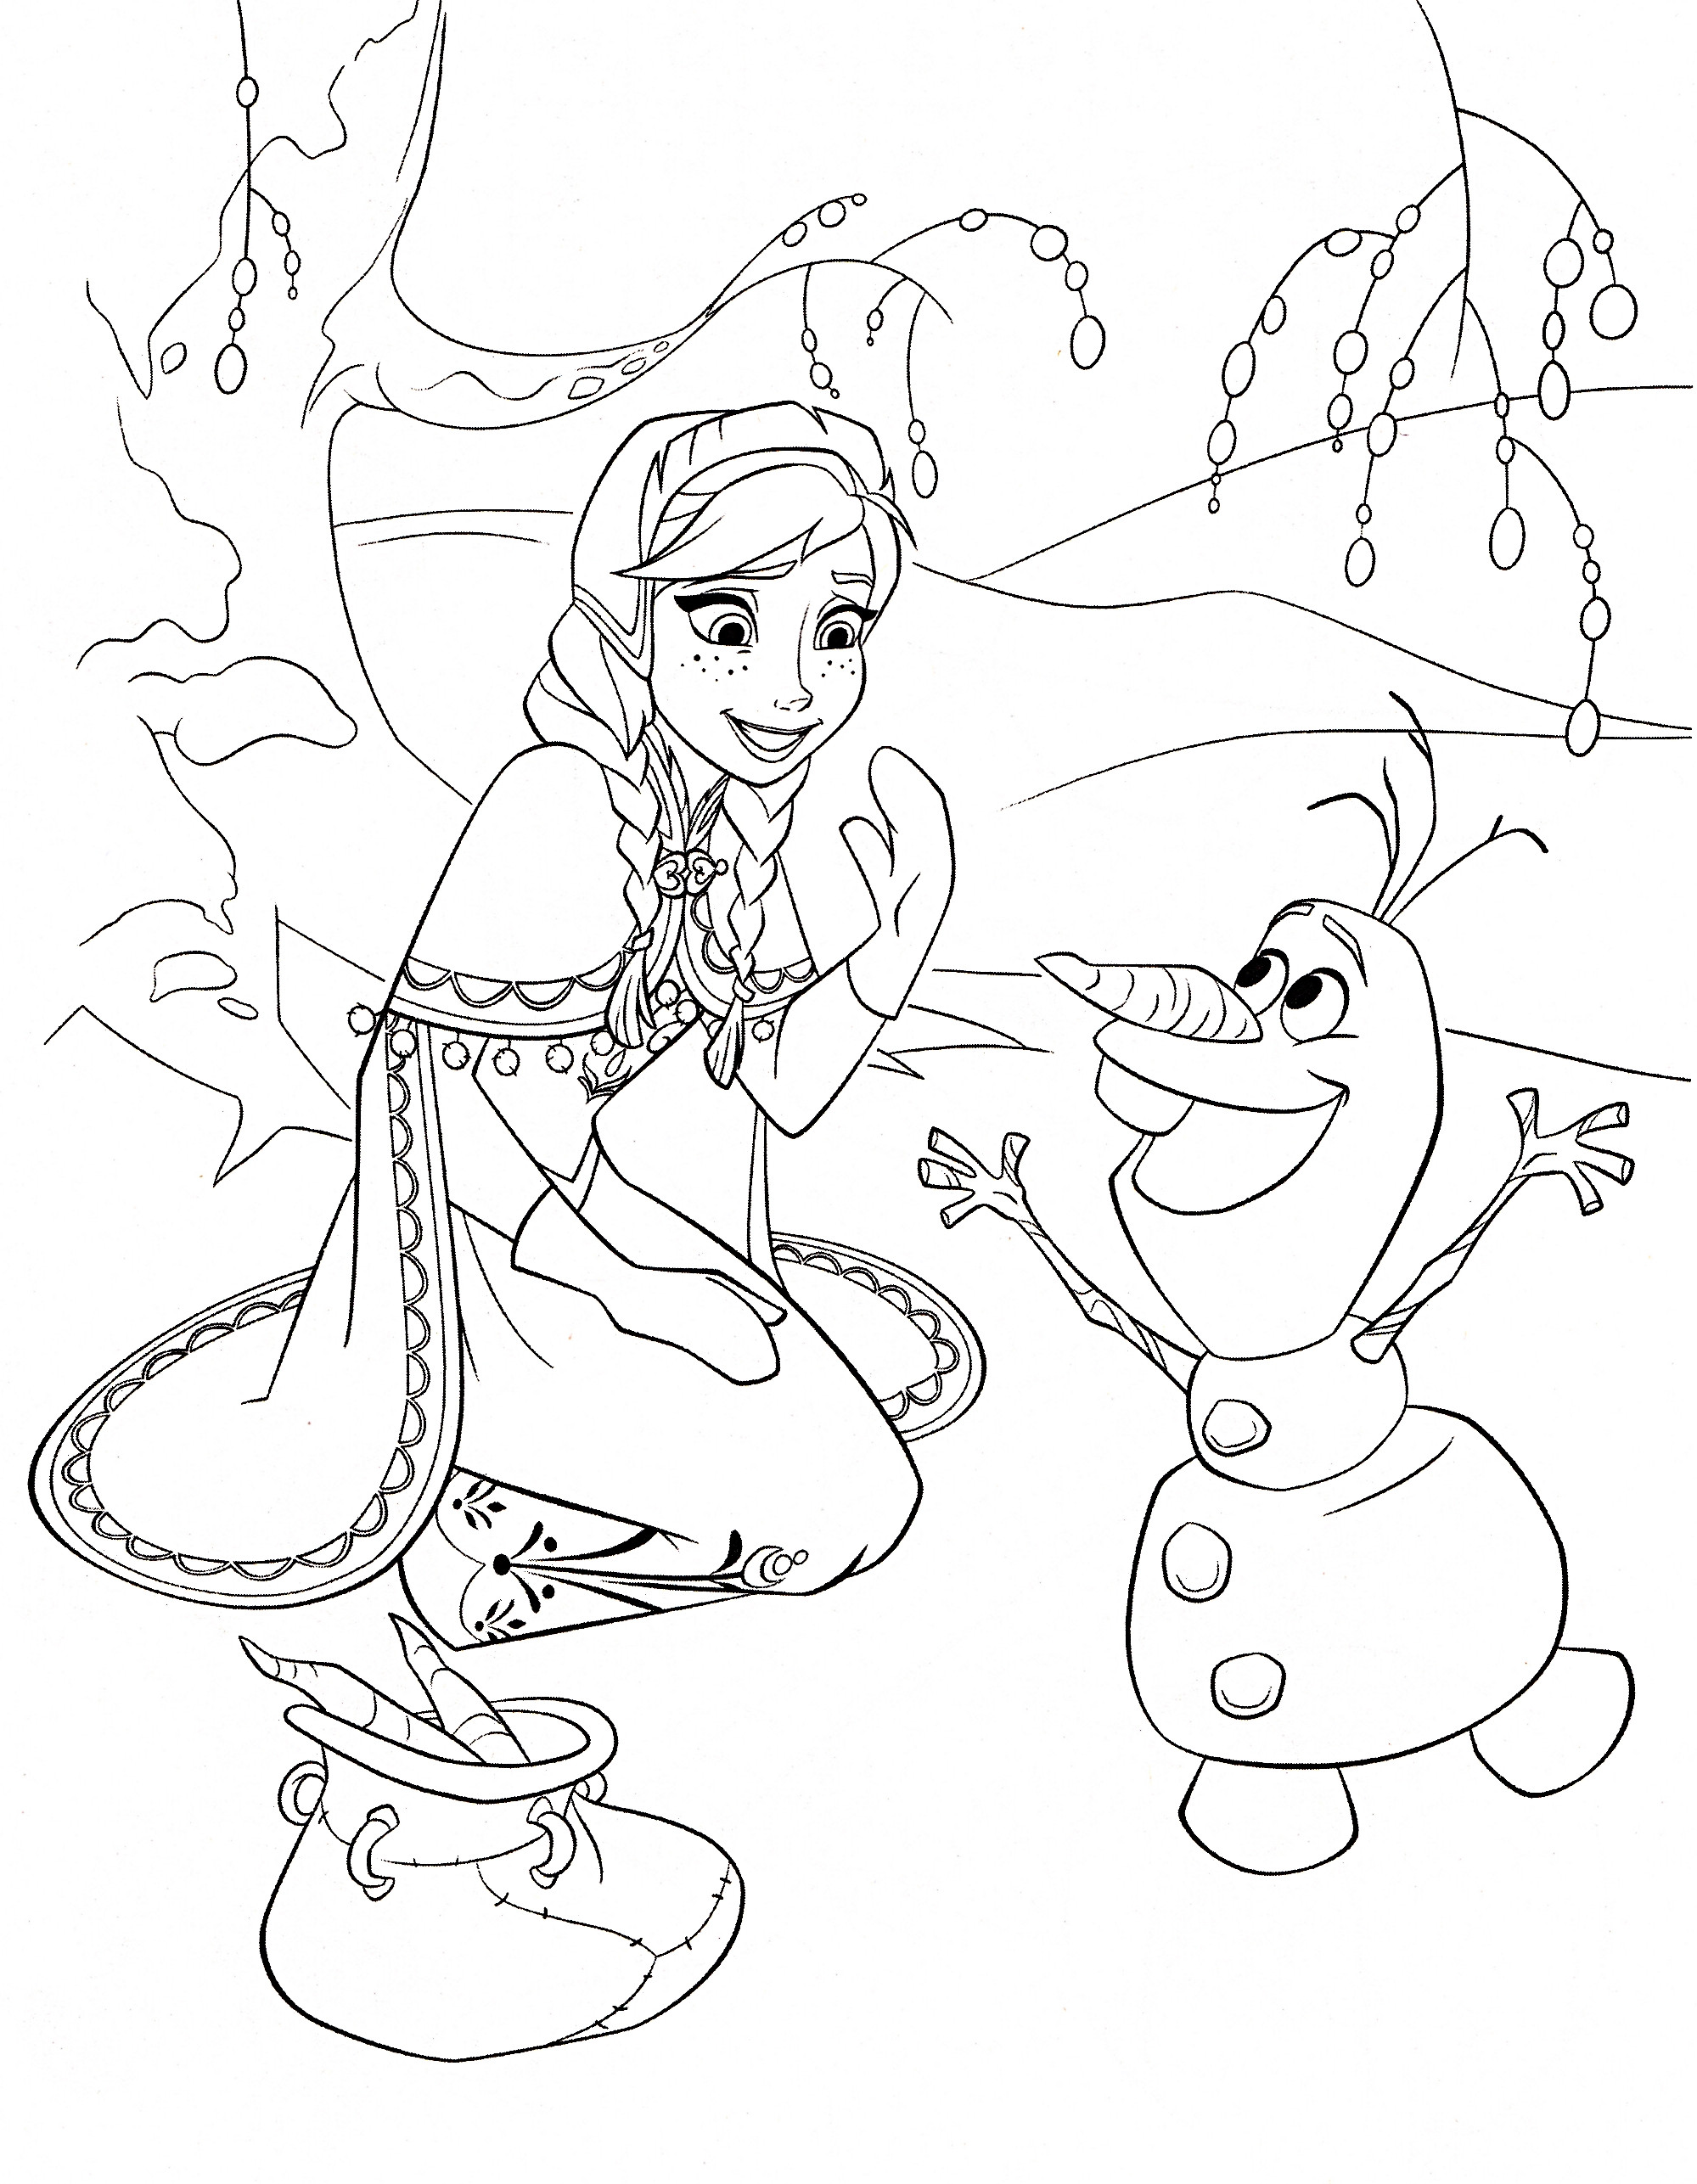 Frozen Printables Coloring Pages
 FREE Frozen Printable Coloring & Activity Pages Plus FREE